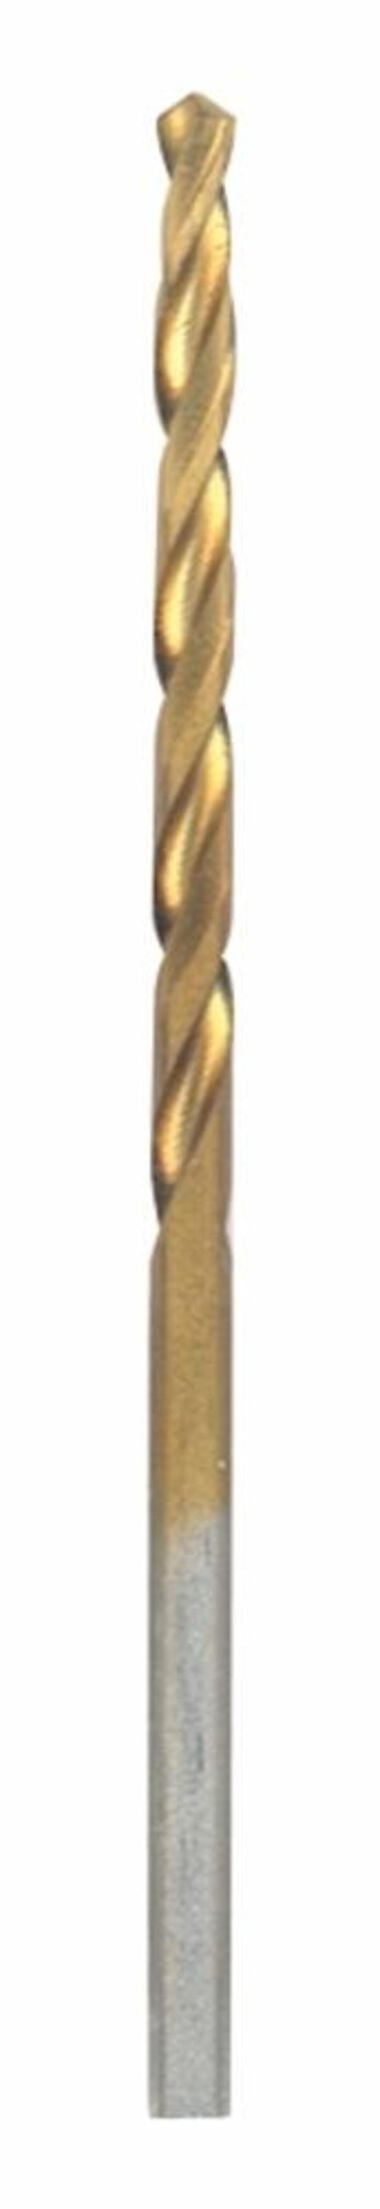 Bosch 3/32 In. x 2-1/4 In. Titanium-Coated Drill Bit, large image number 0